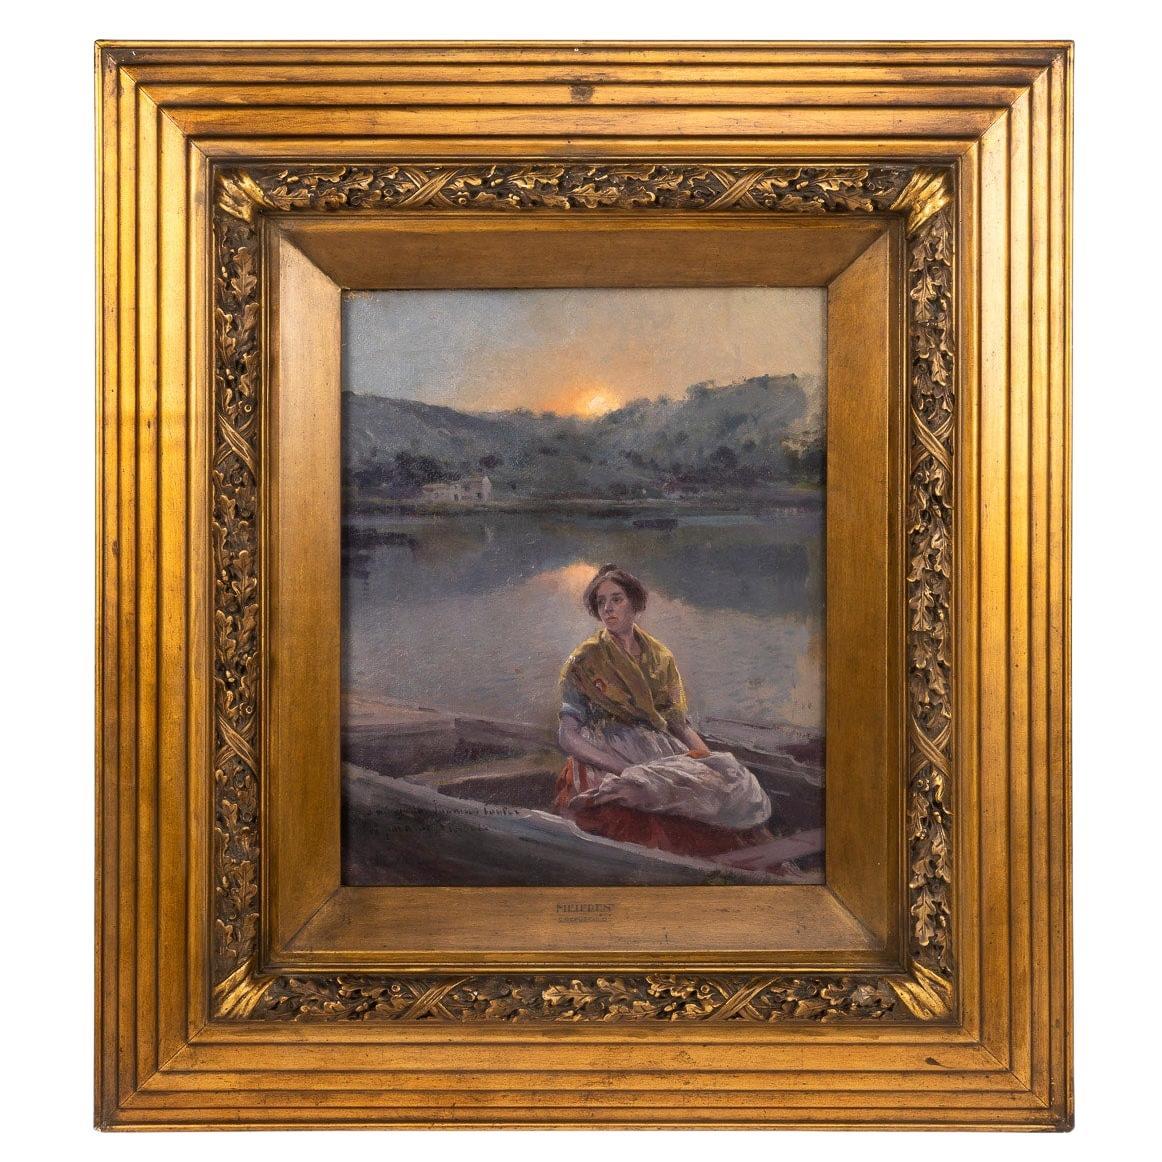 'Crepusculo' 'Twilight' Signed by Eliseo Meifren 'Spain 1856-1949' For Sale